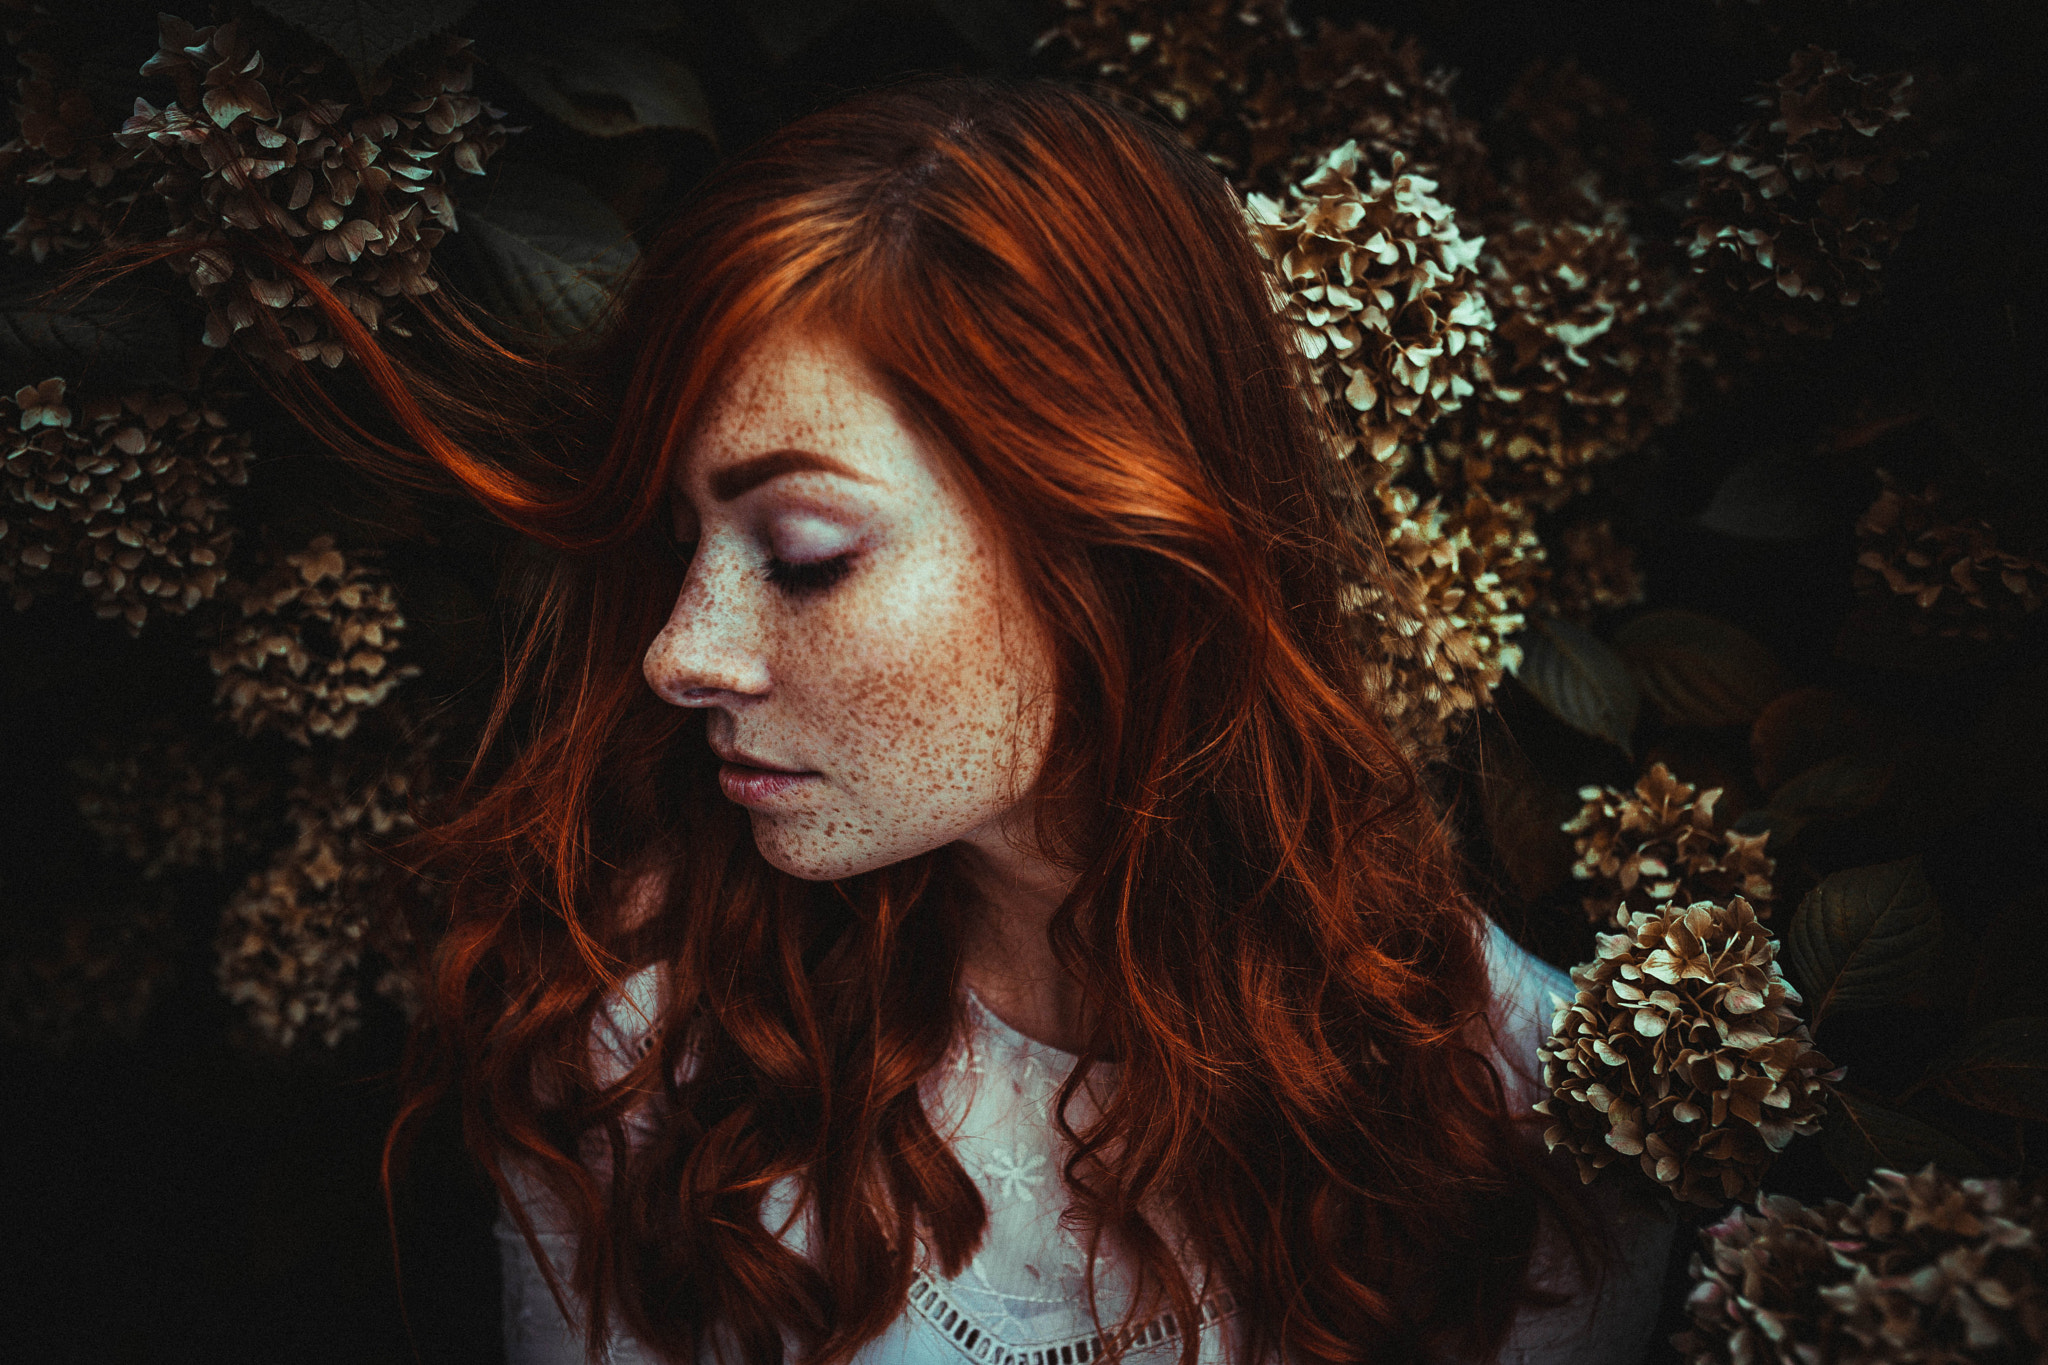 People 2048x1365 women redhead closed eyes freckles face white shirt flowers Dominic Krug profile Michelle Ramone